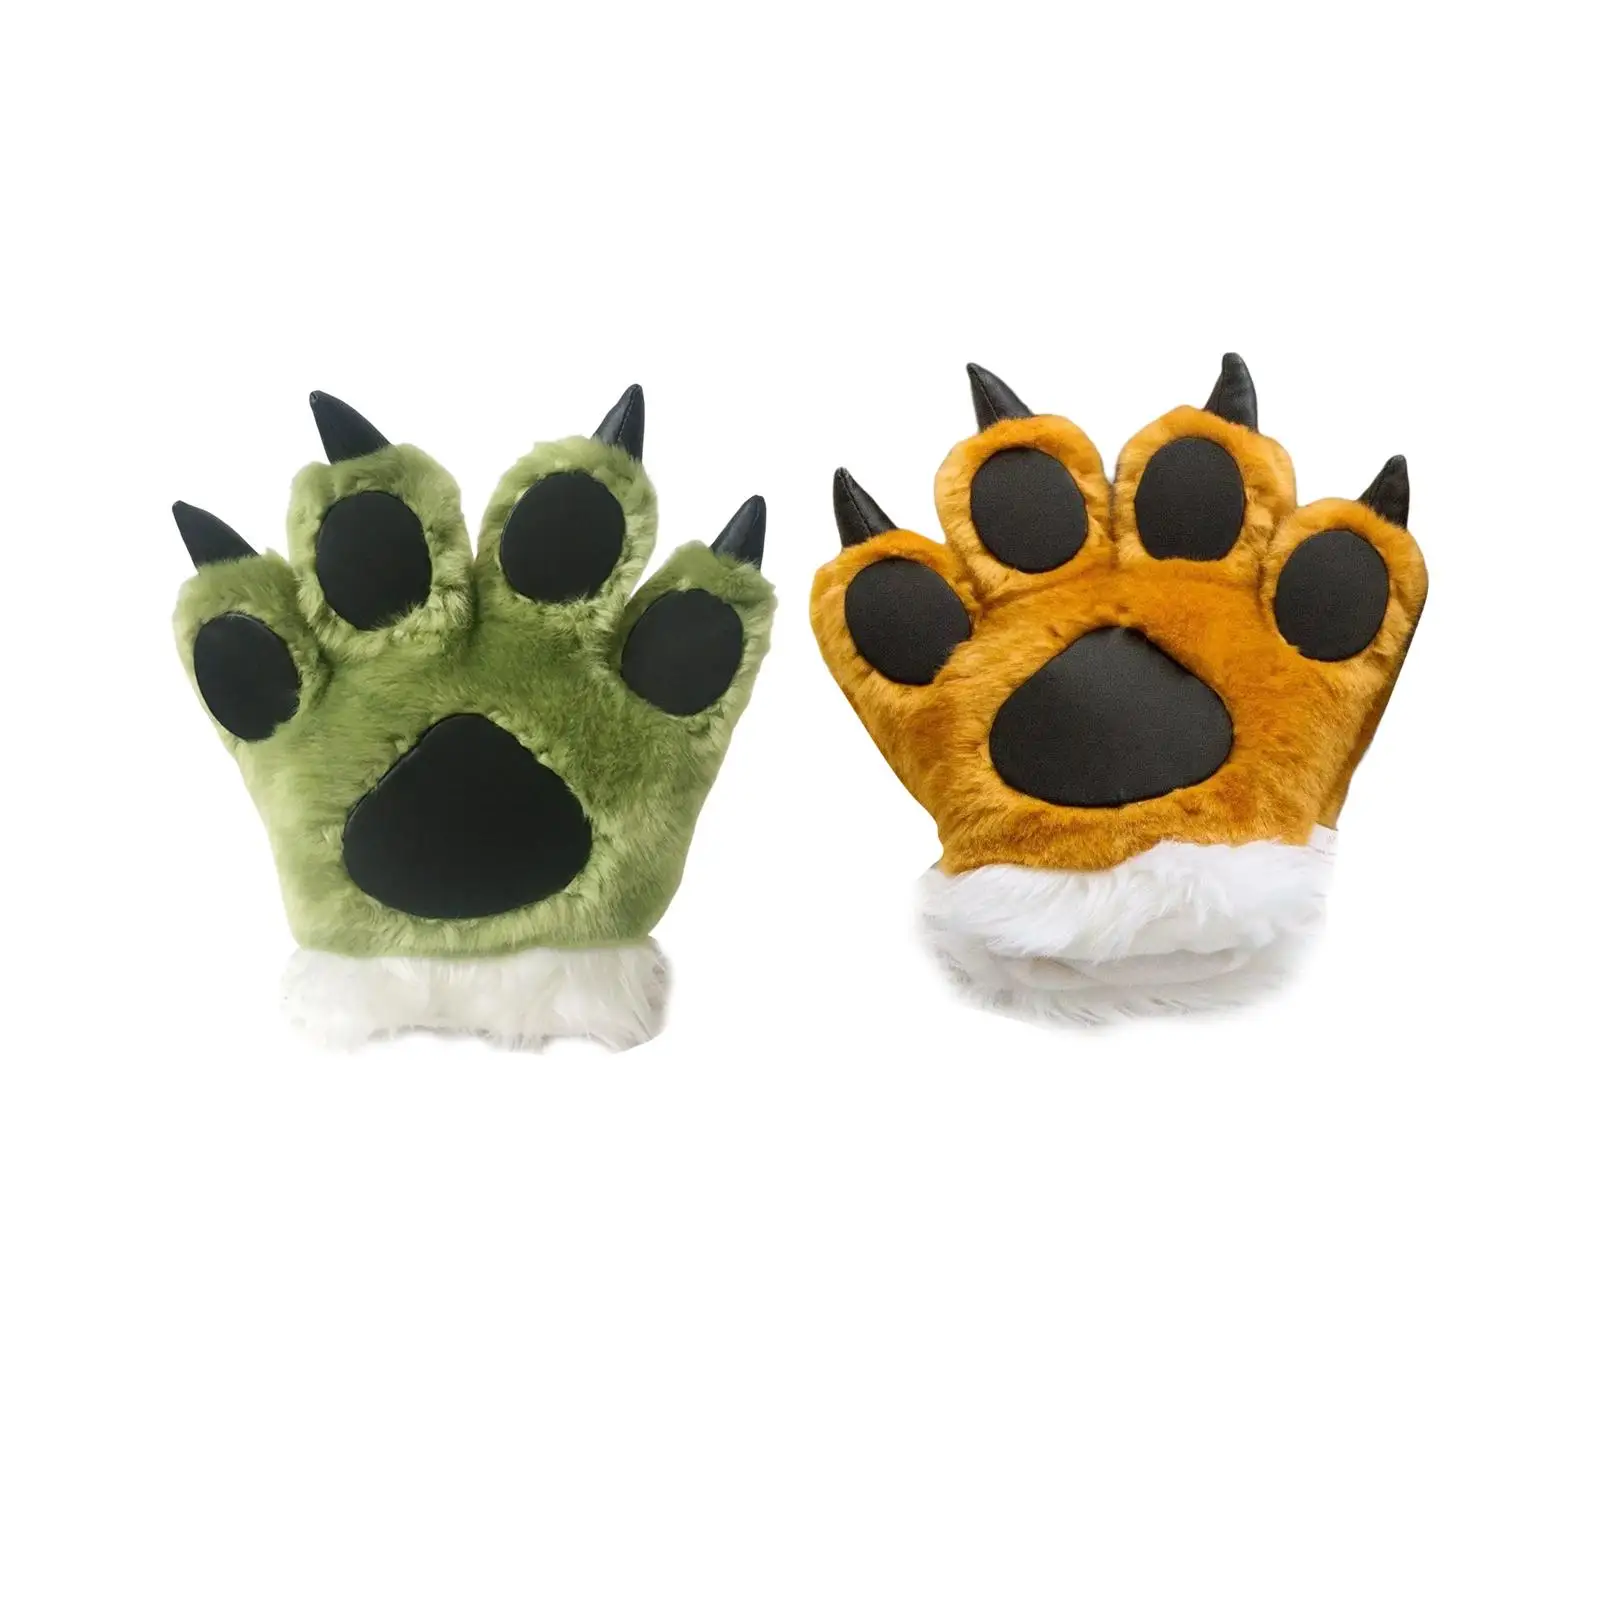 Animals Palm Paw Glove Toy Plush Halloween Cosplay Costume Bright Color Claw Mitten